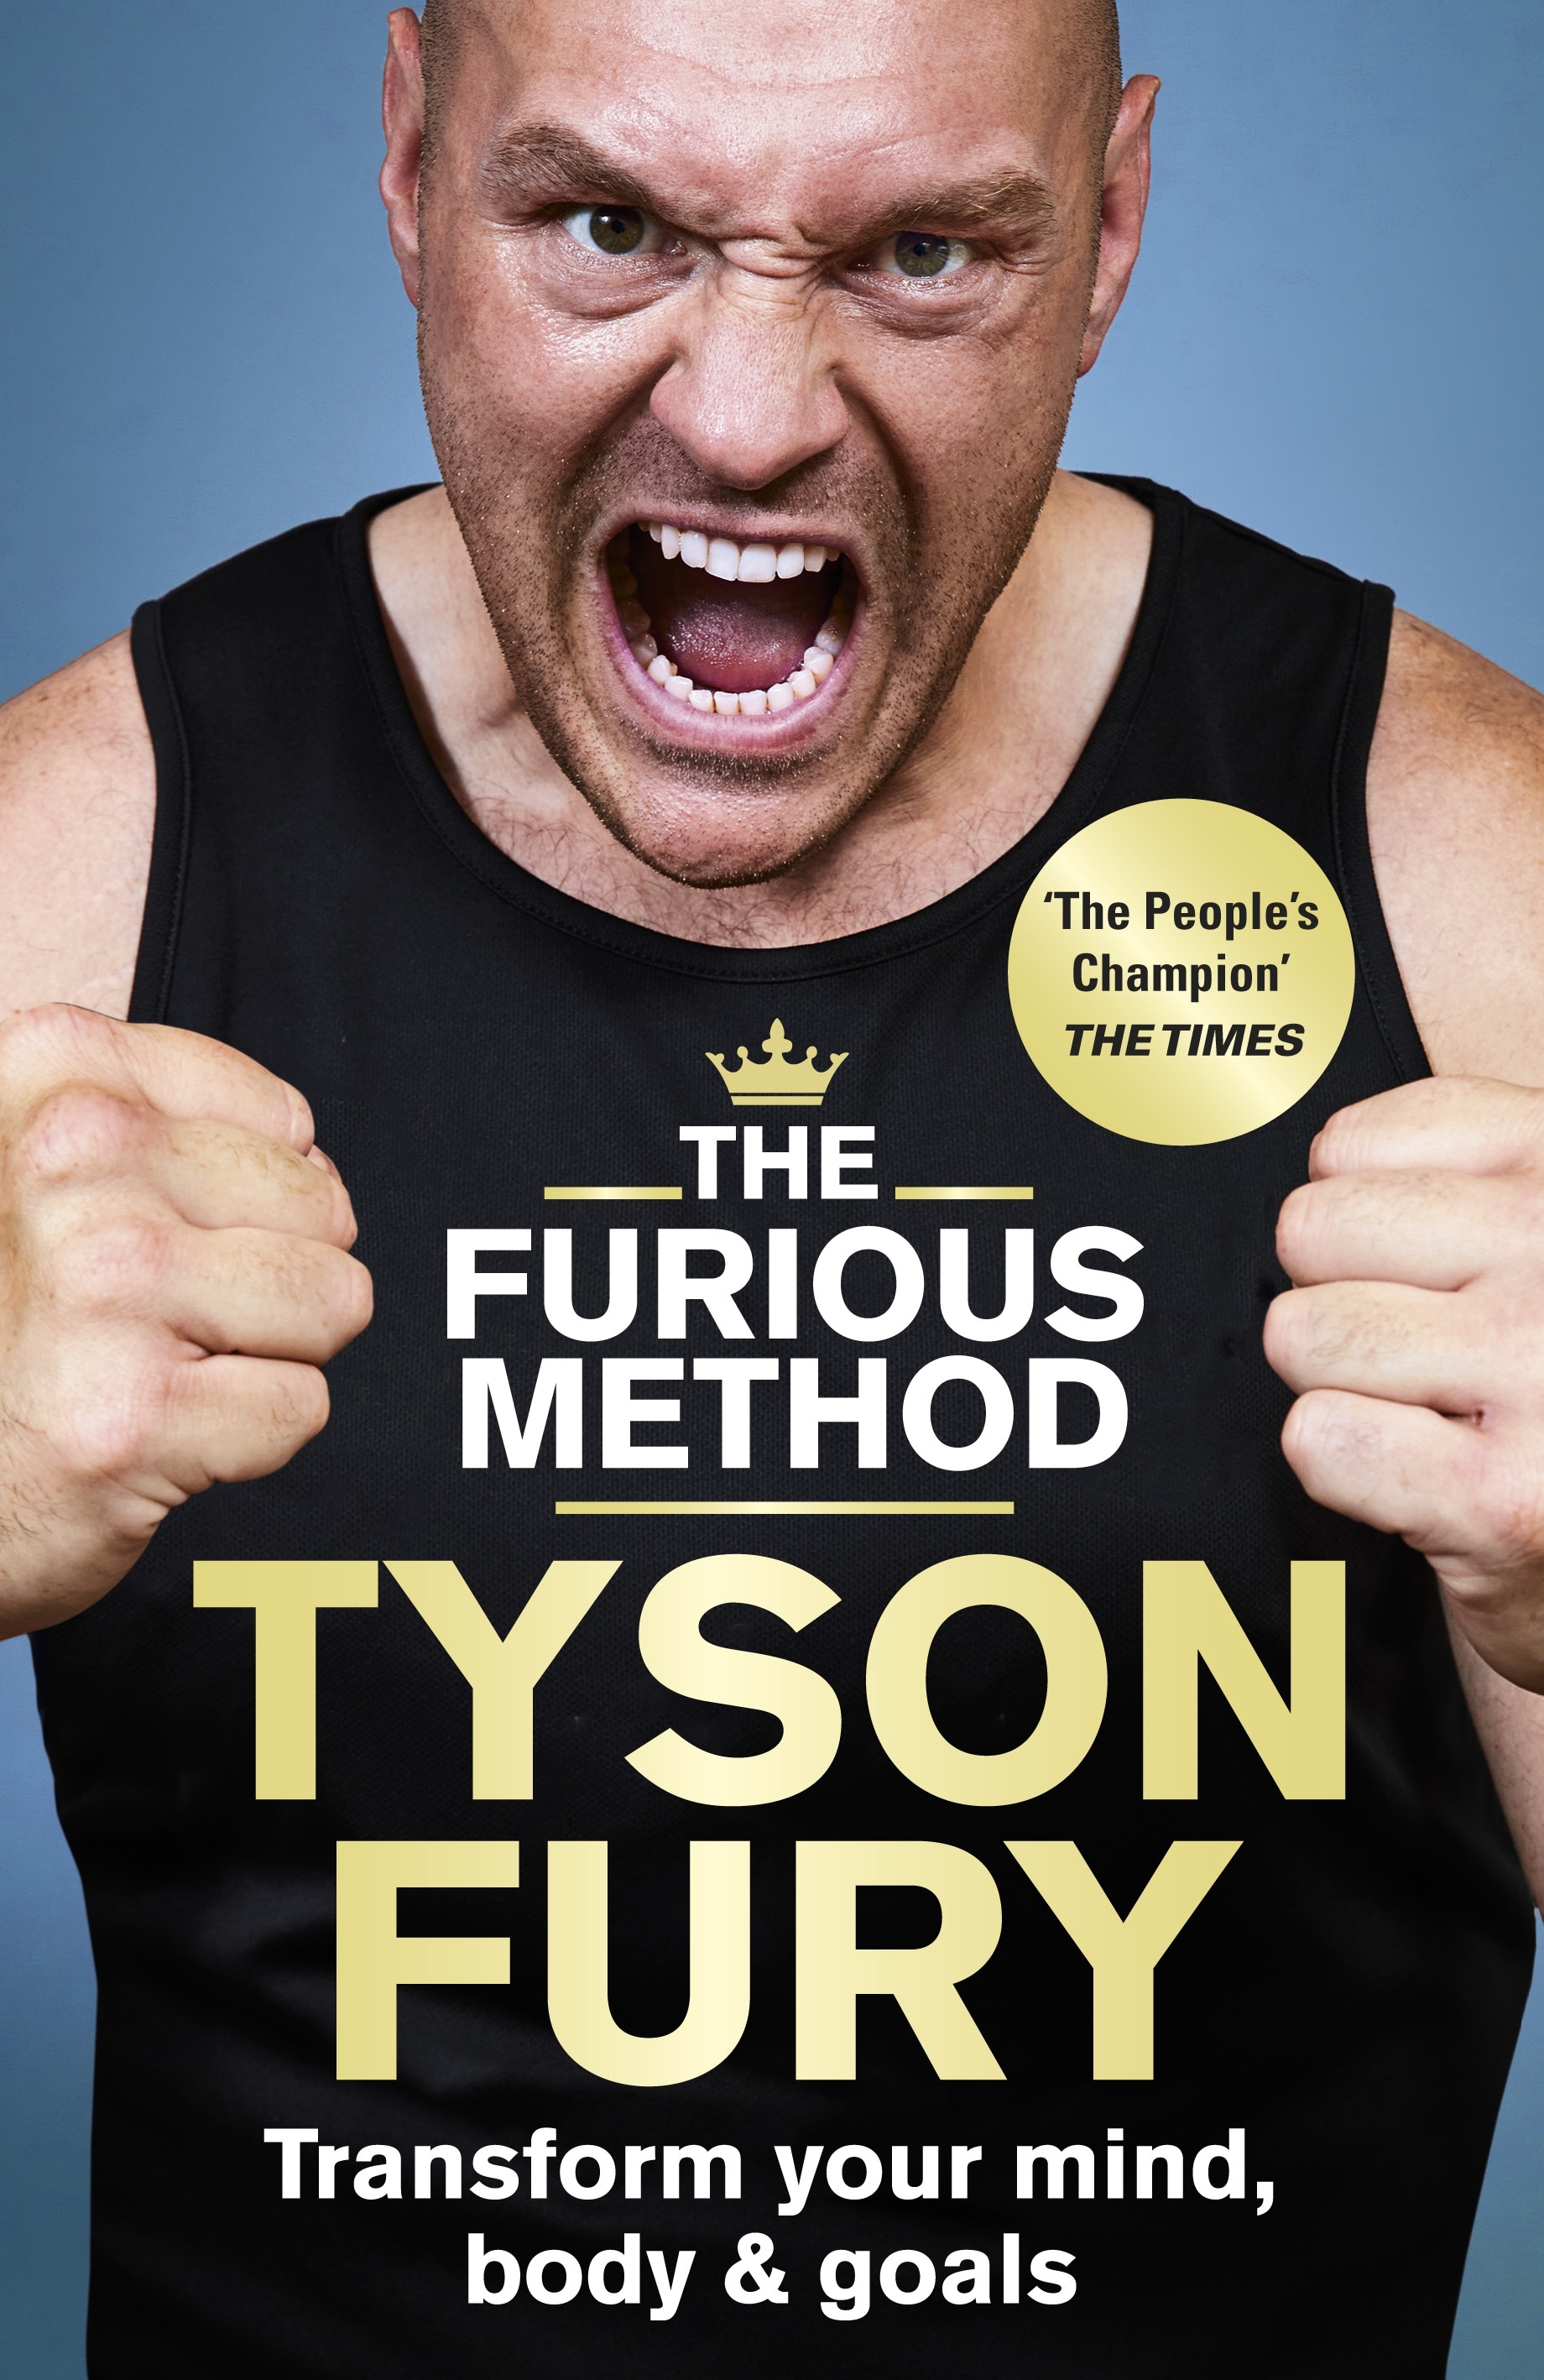 Book “The Furious Method” by Tyson Fury — November 12, 2020